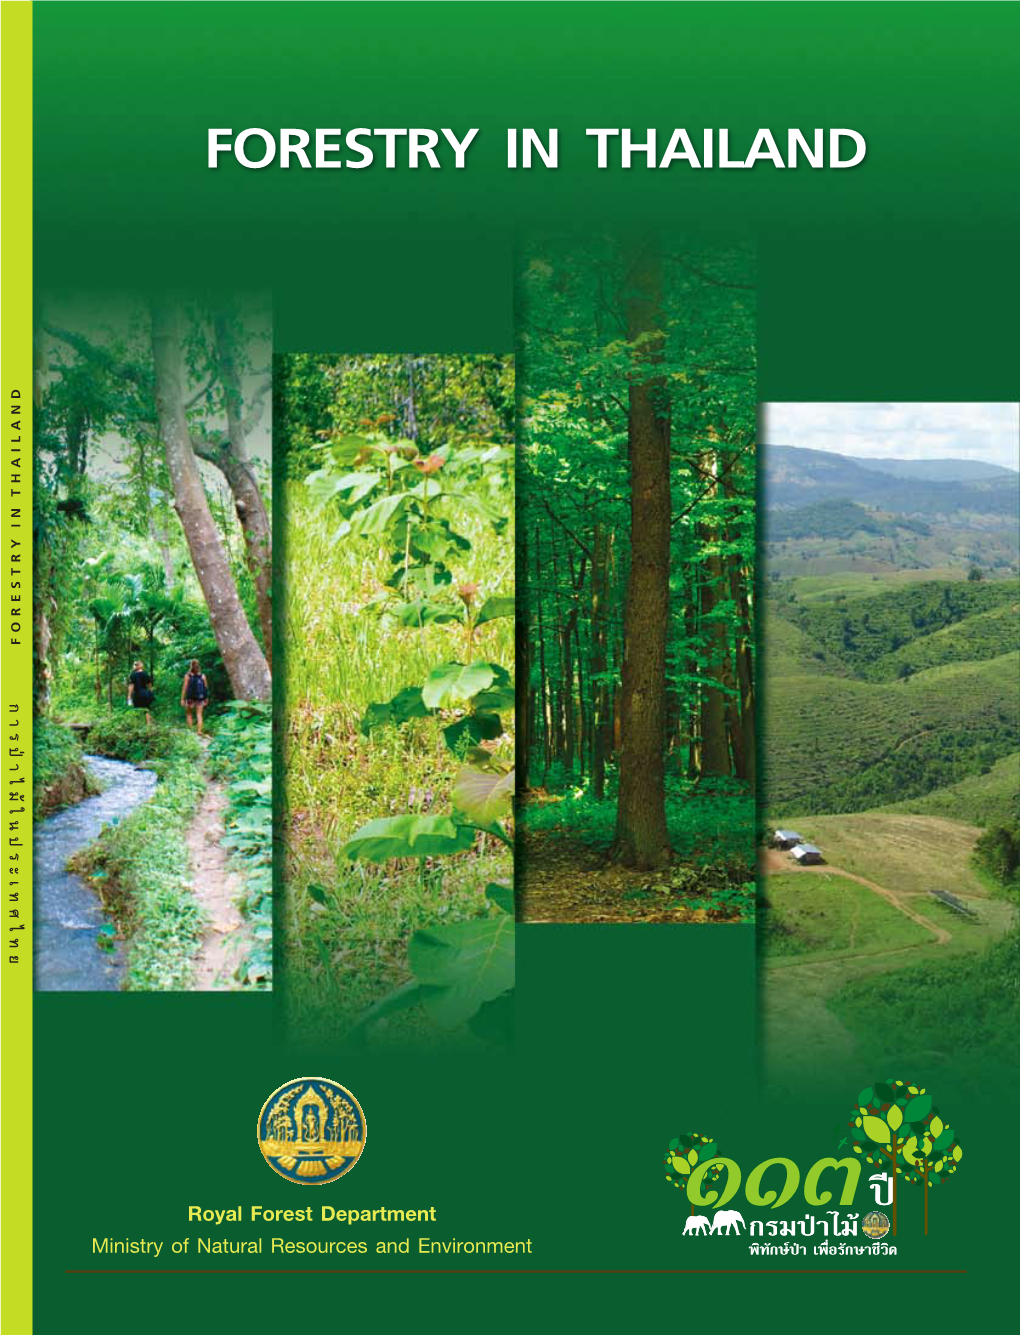 Royal Forest Department Ministry of Natural Resources and Environment